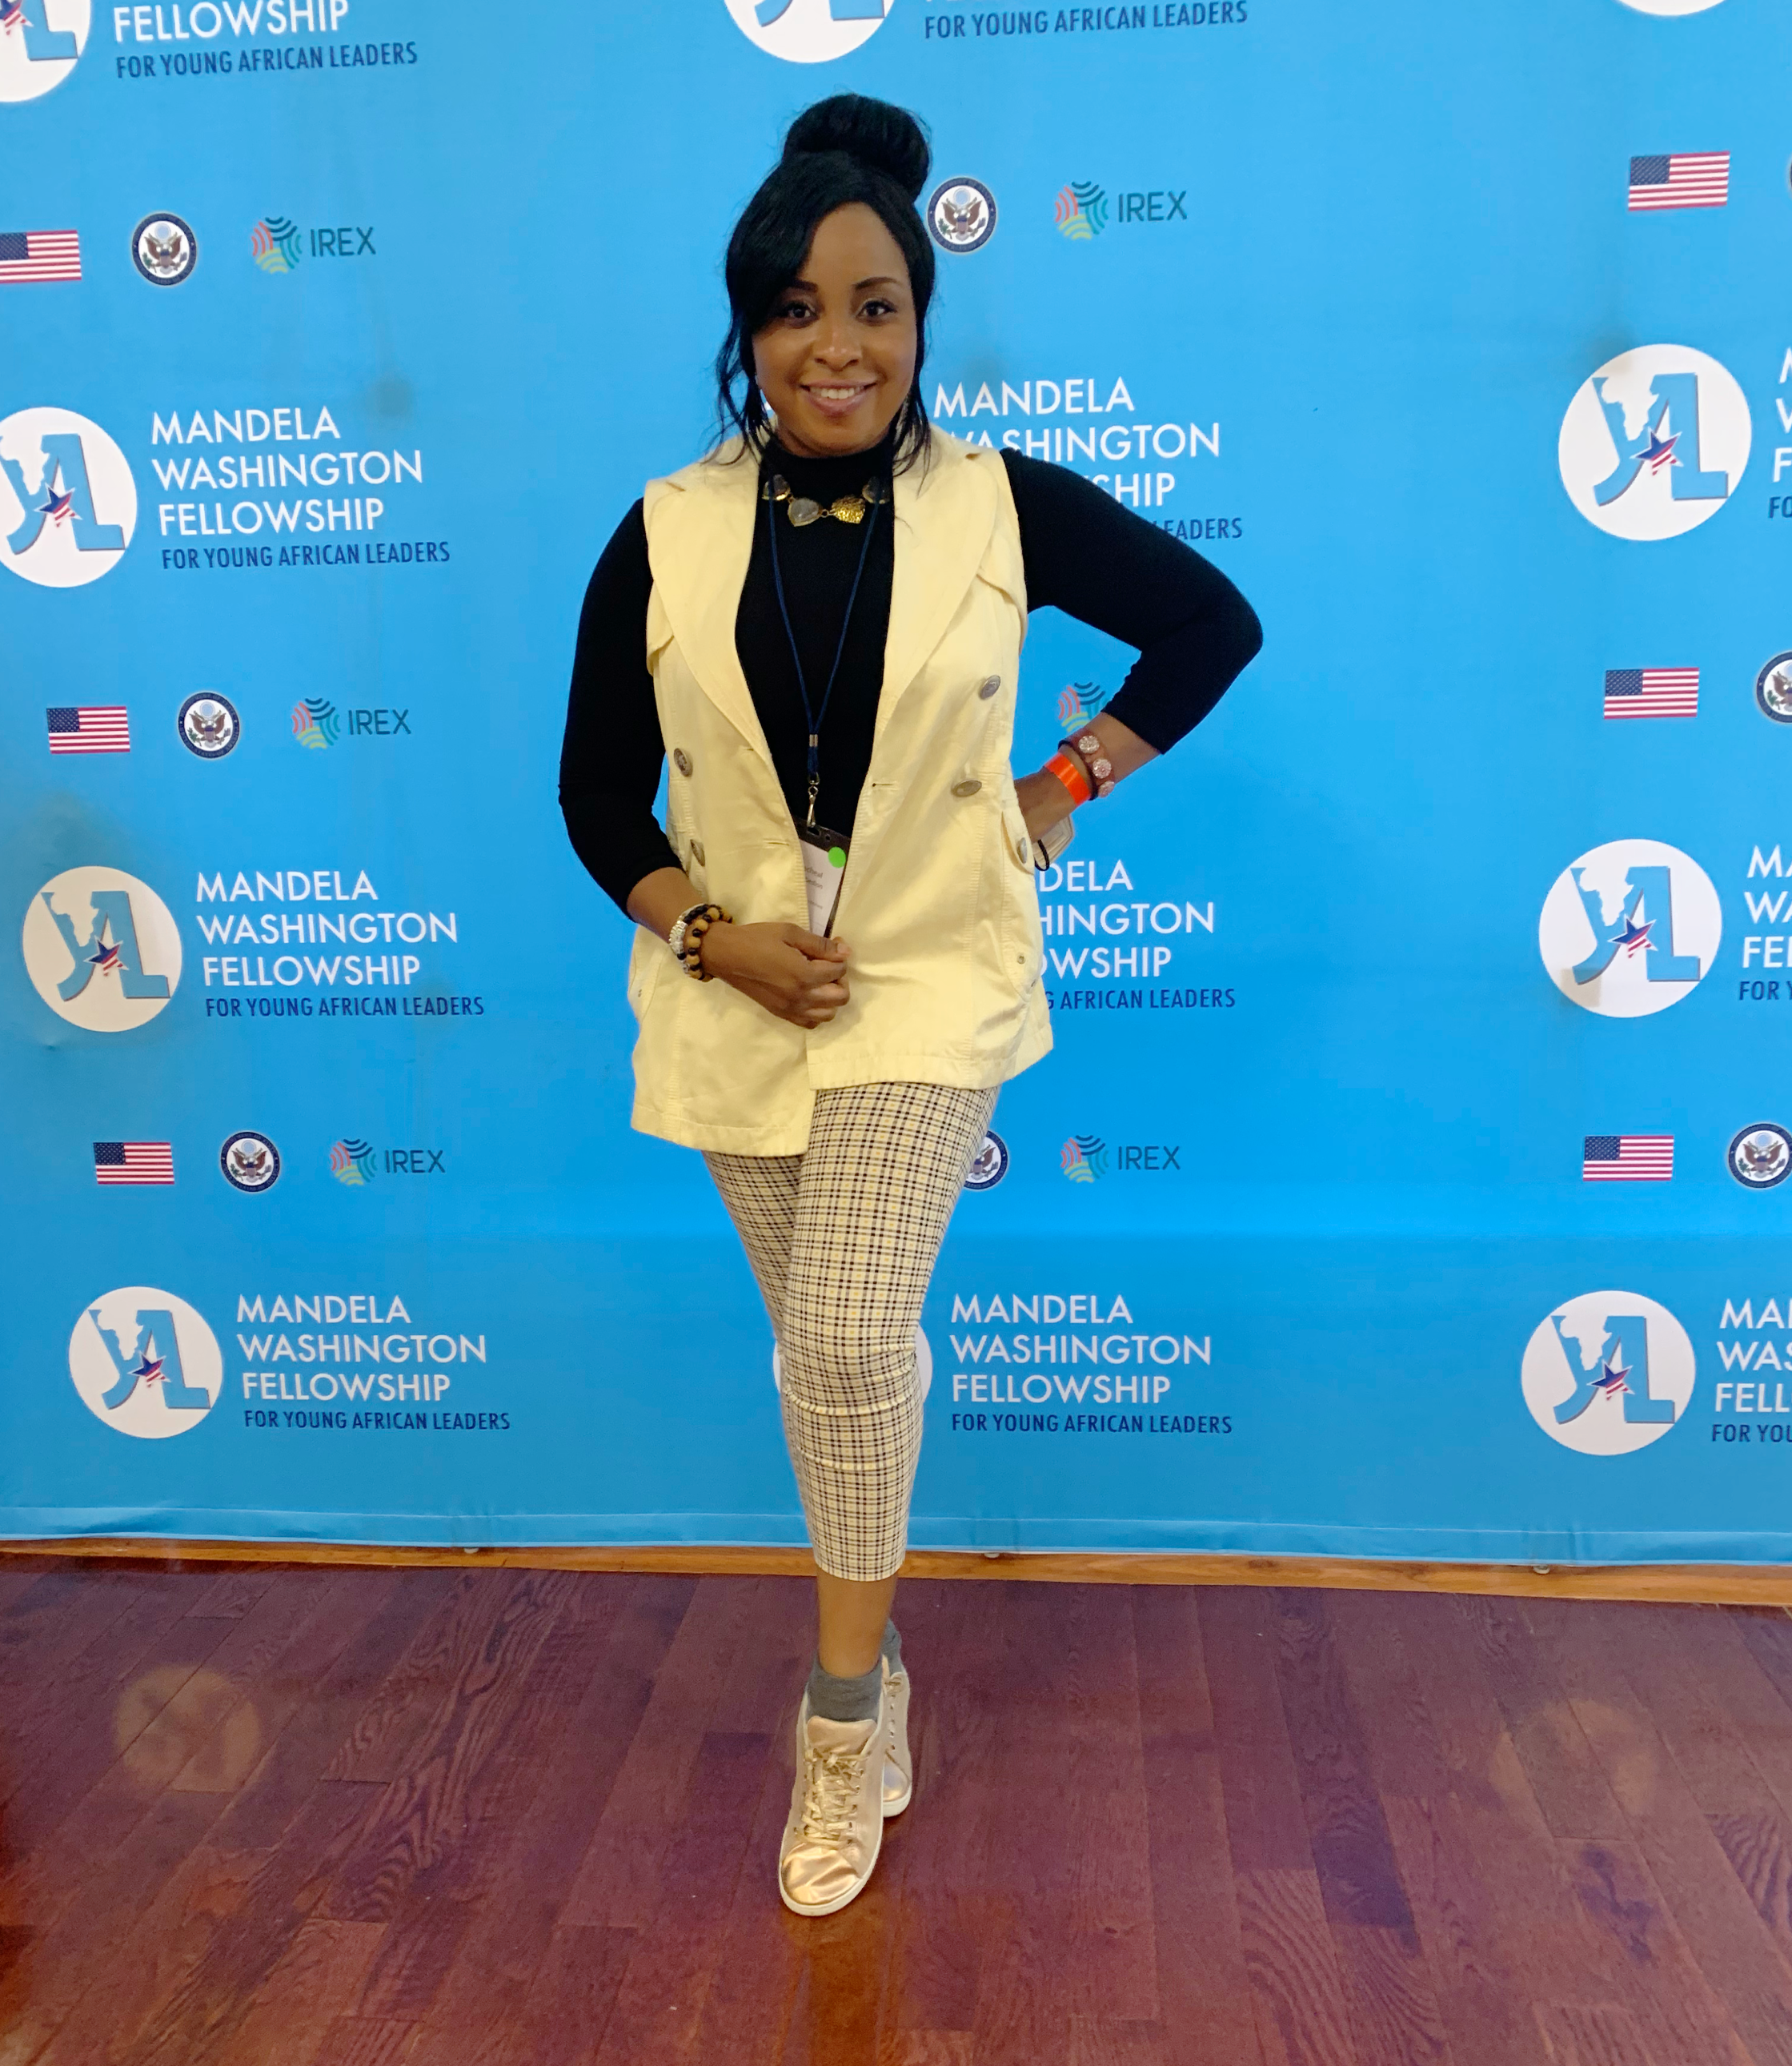 Racheal Inegbedion posing in front of a blue banner that reads The Mandela Washington Fellowship.